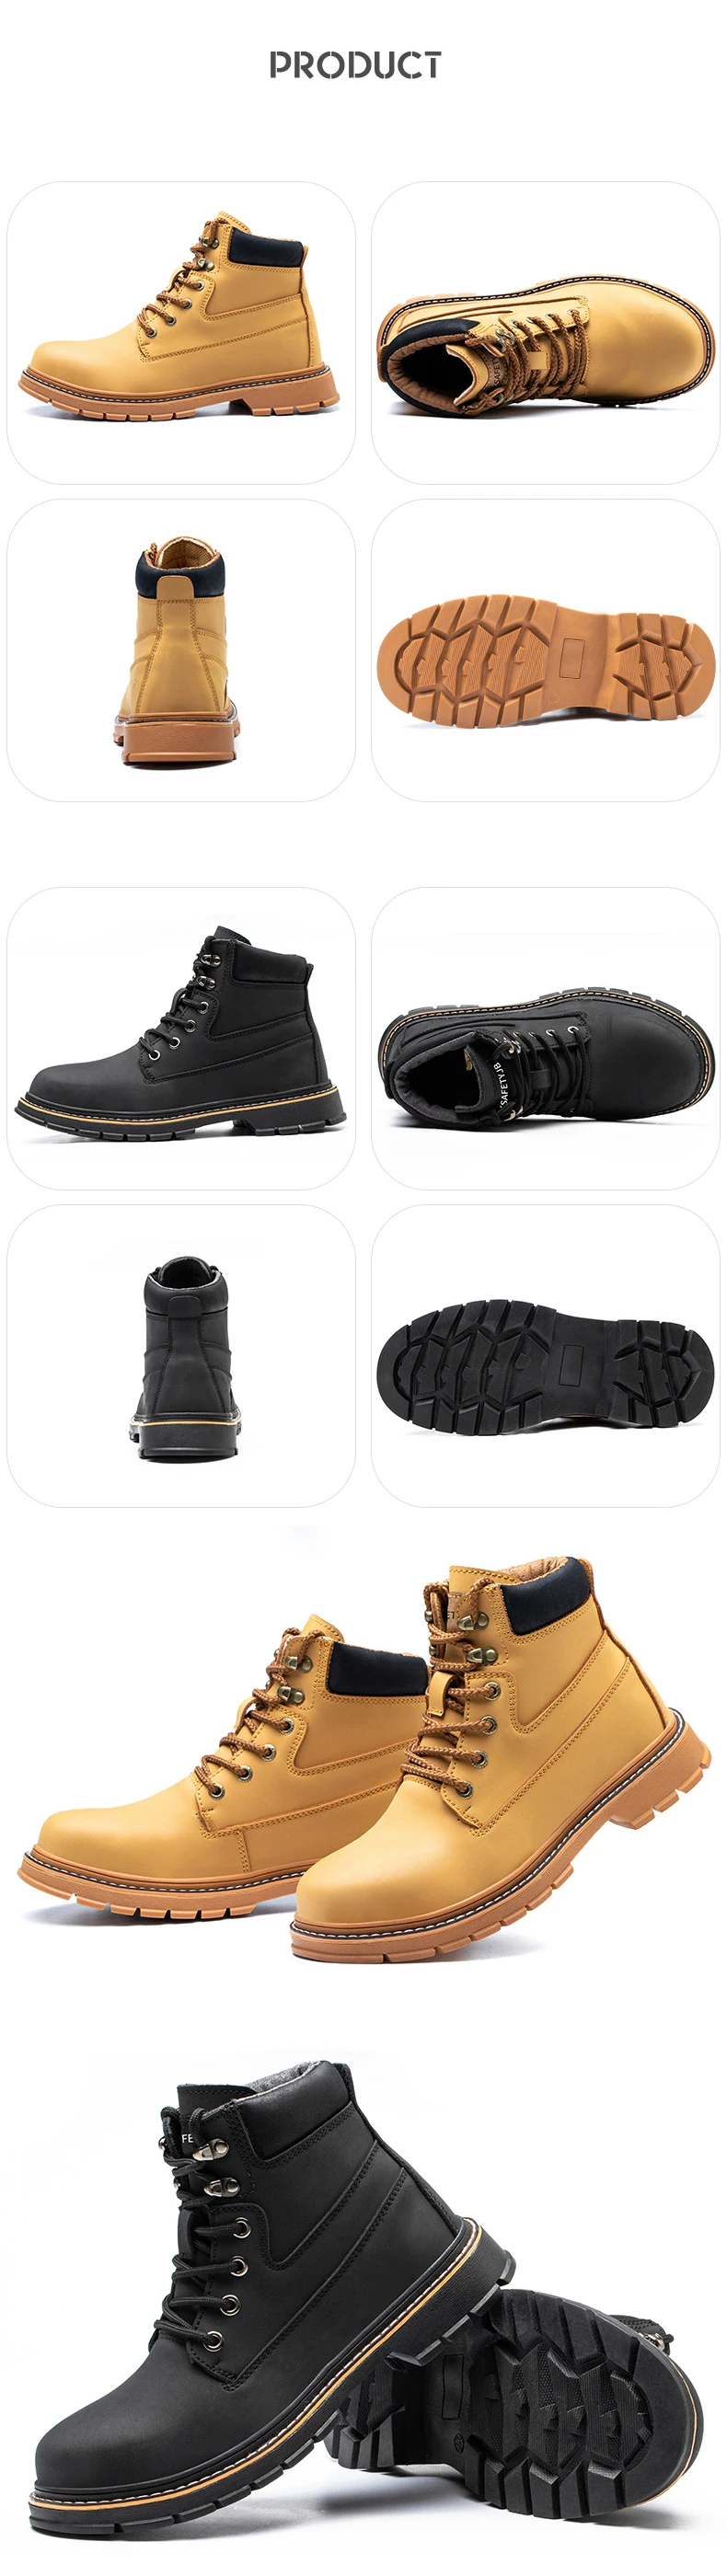 Goodyear Safety Shoes New Fashionable Safety Shoes Work - Buy Goodyear ...